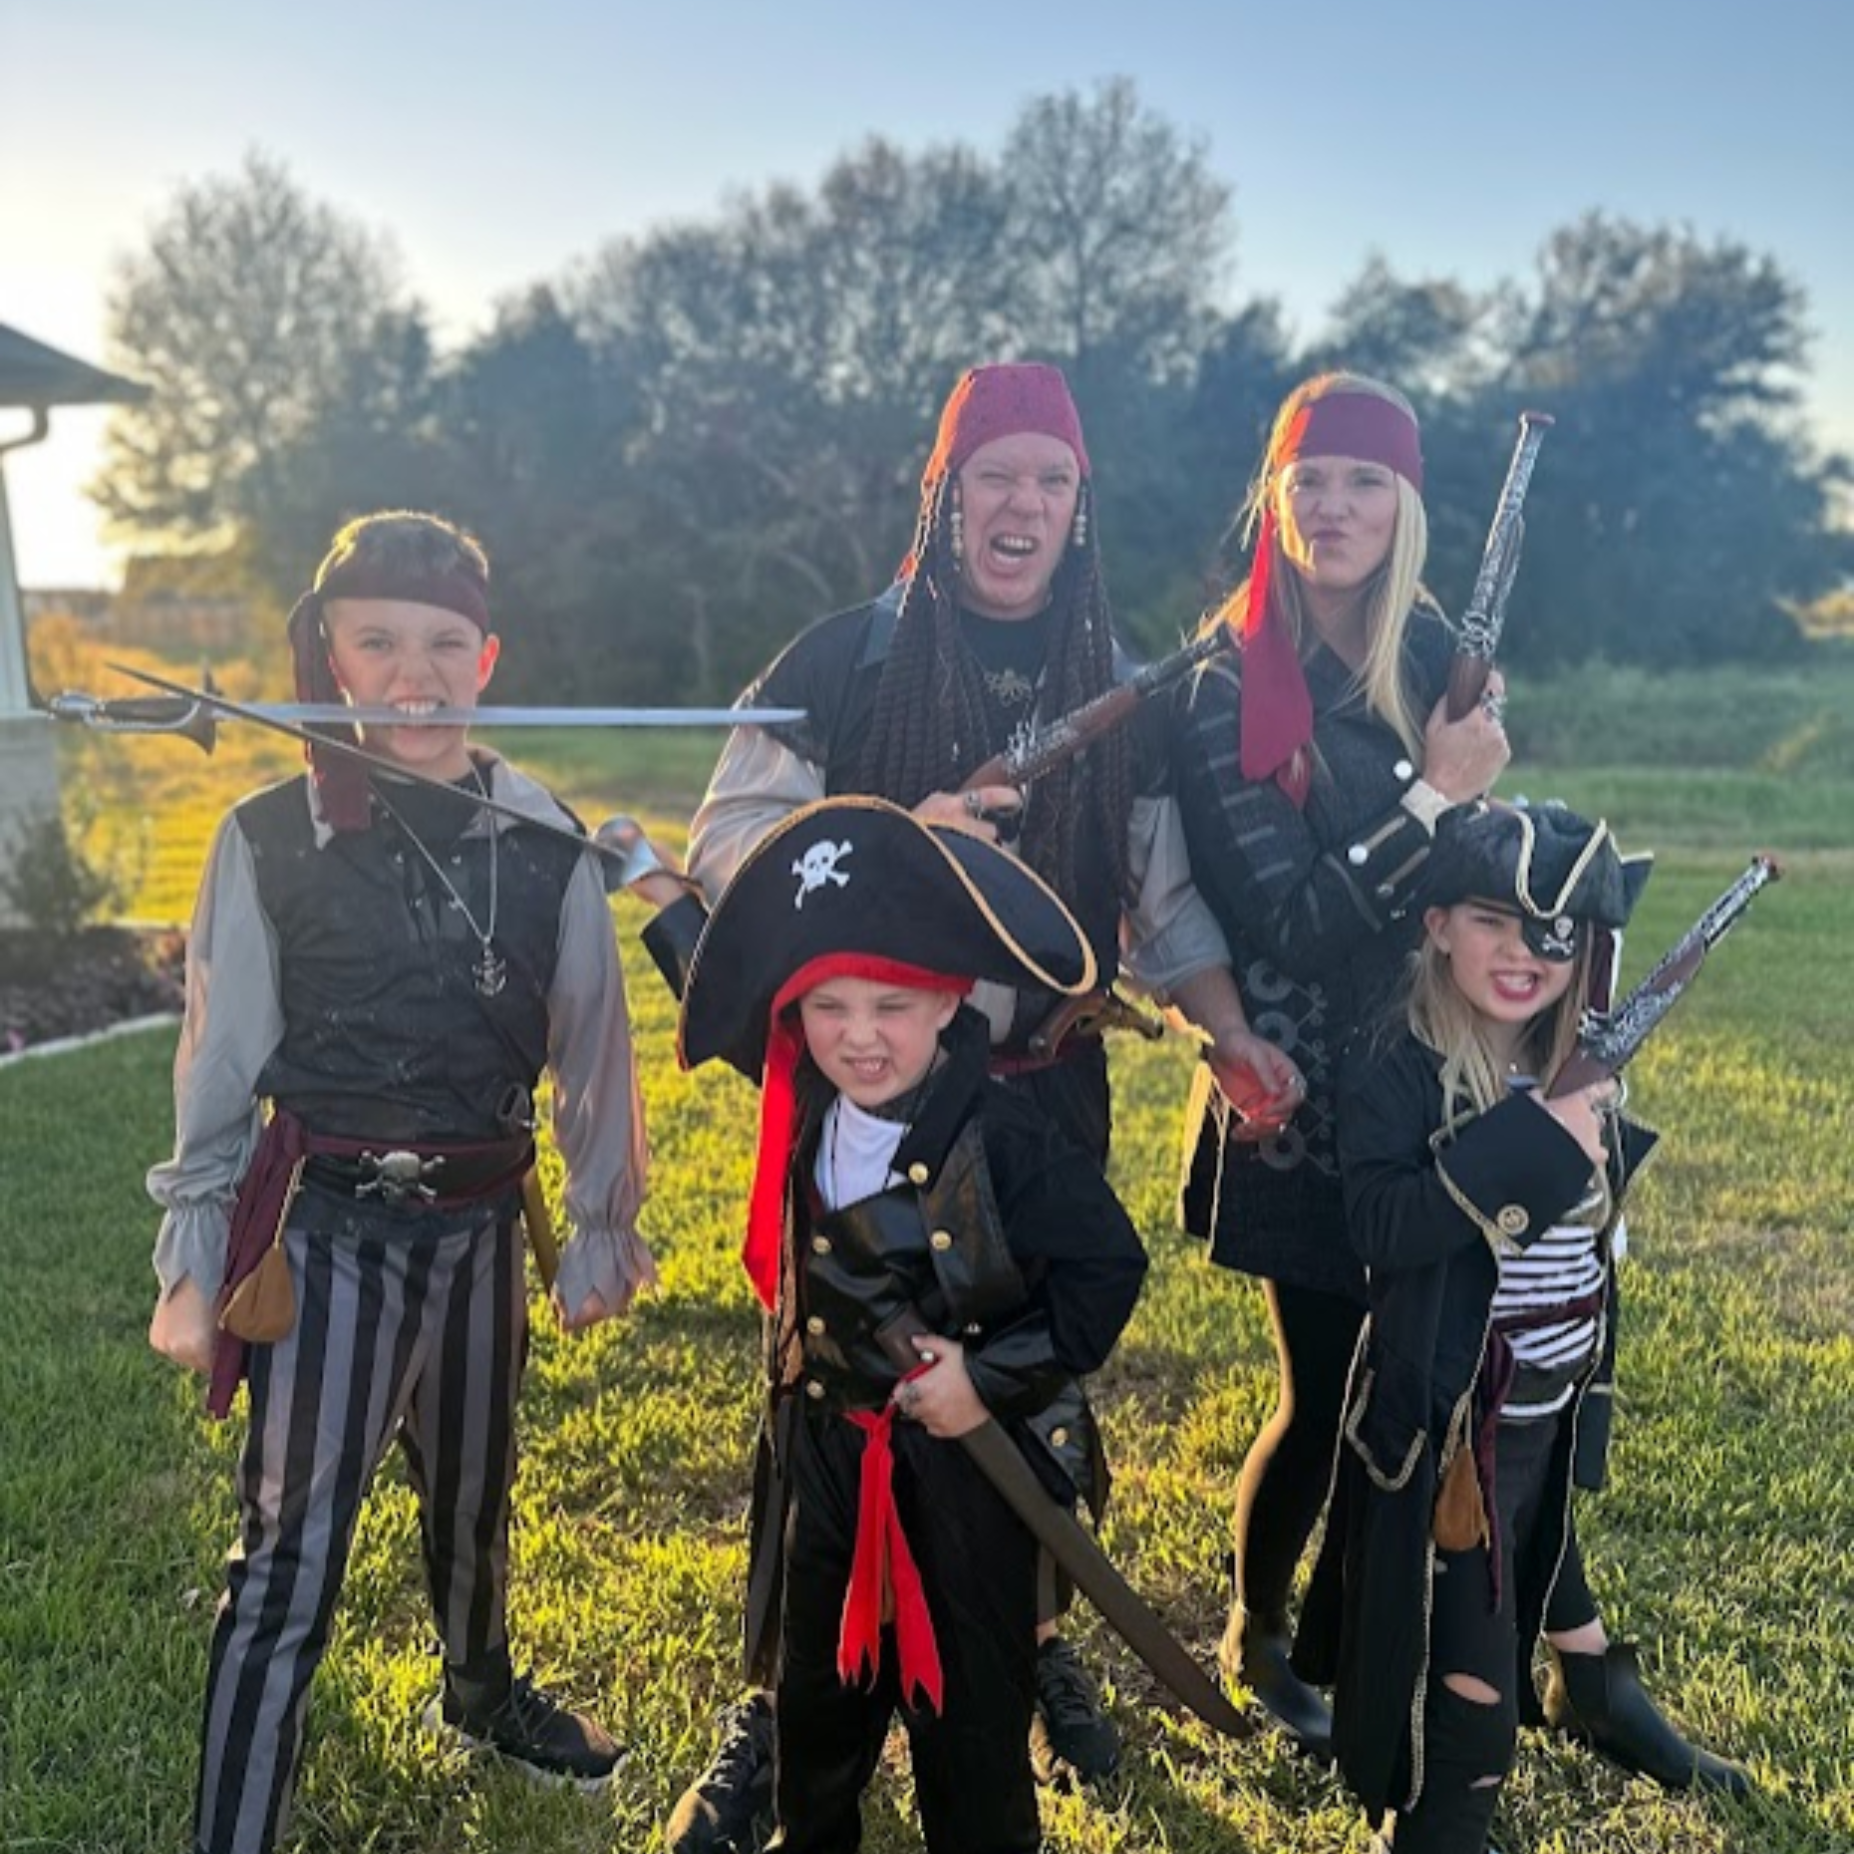 One of our favorite family traditions are themed Halloween costumes!